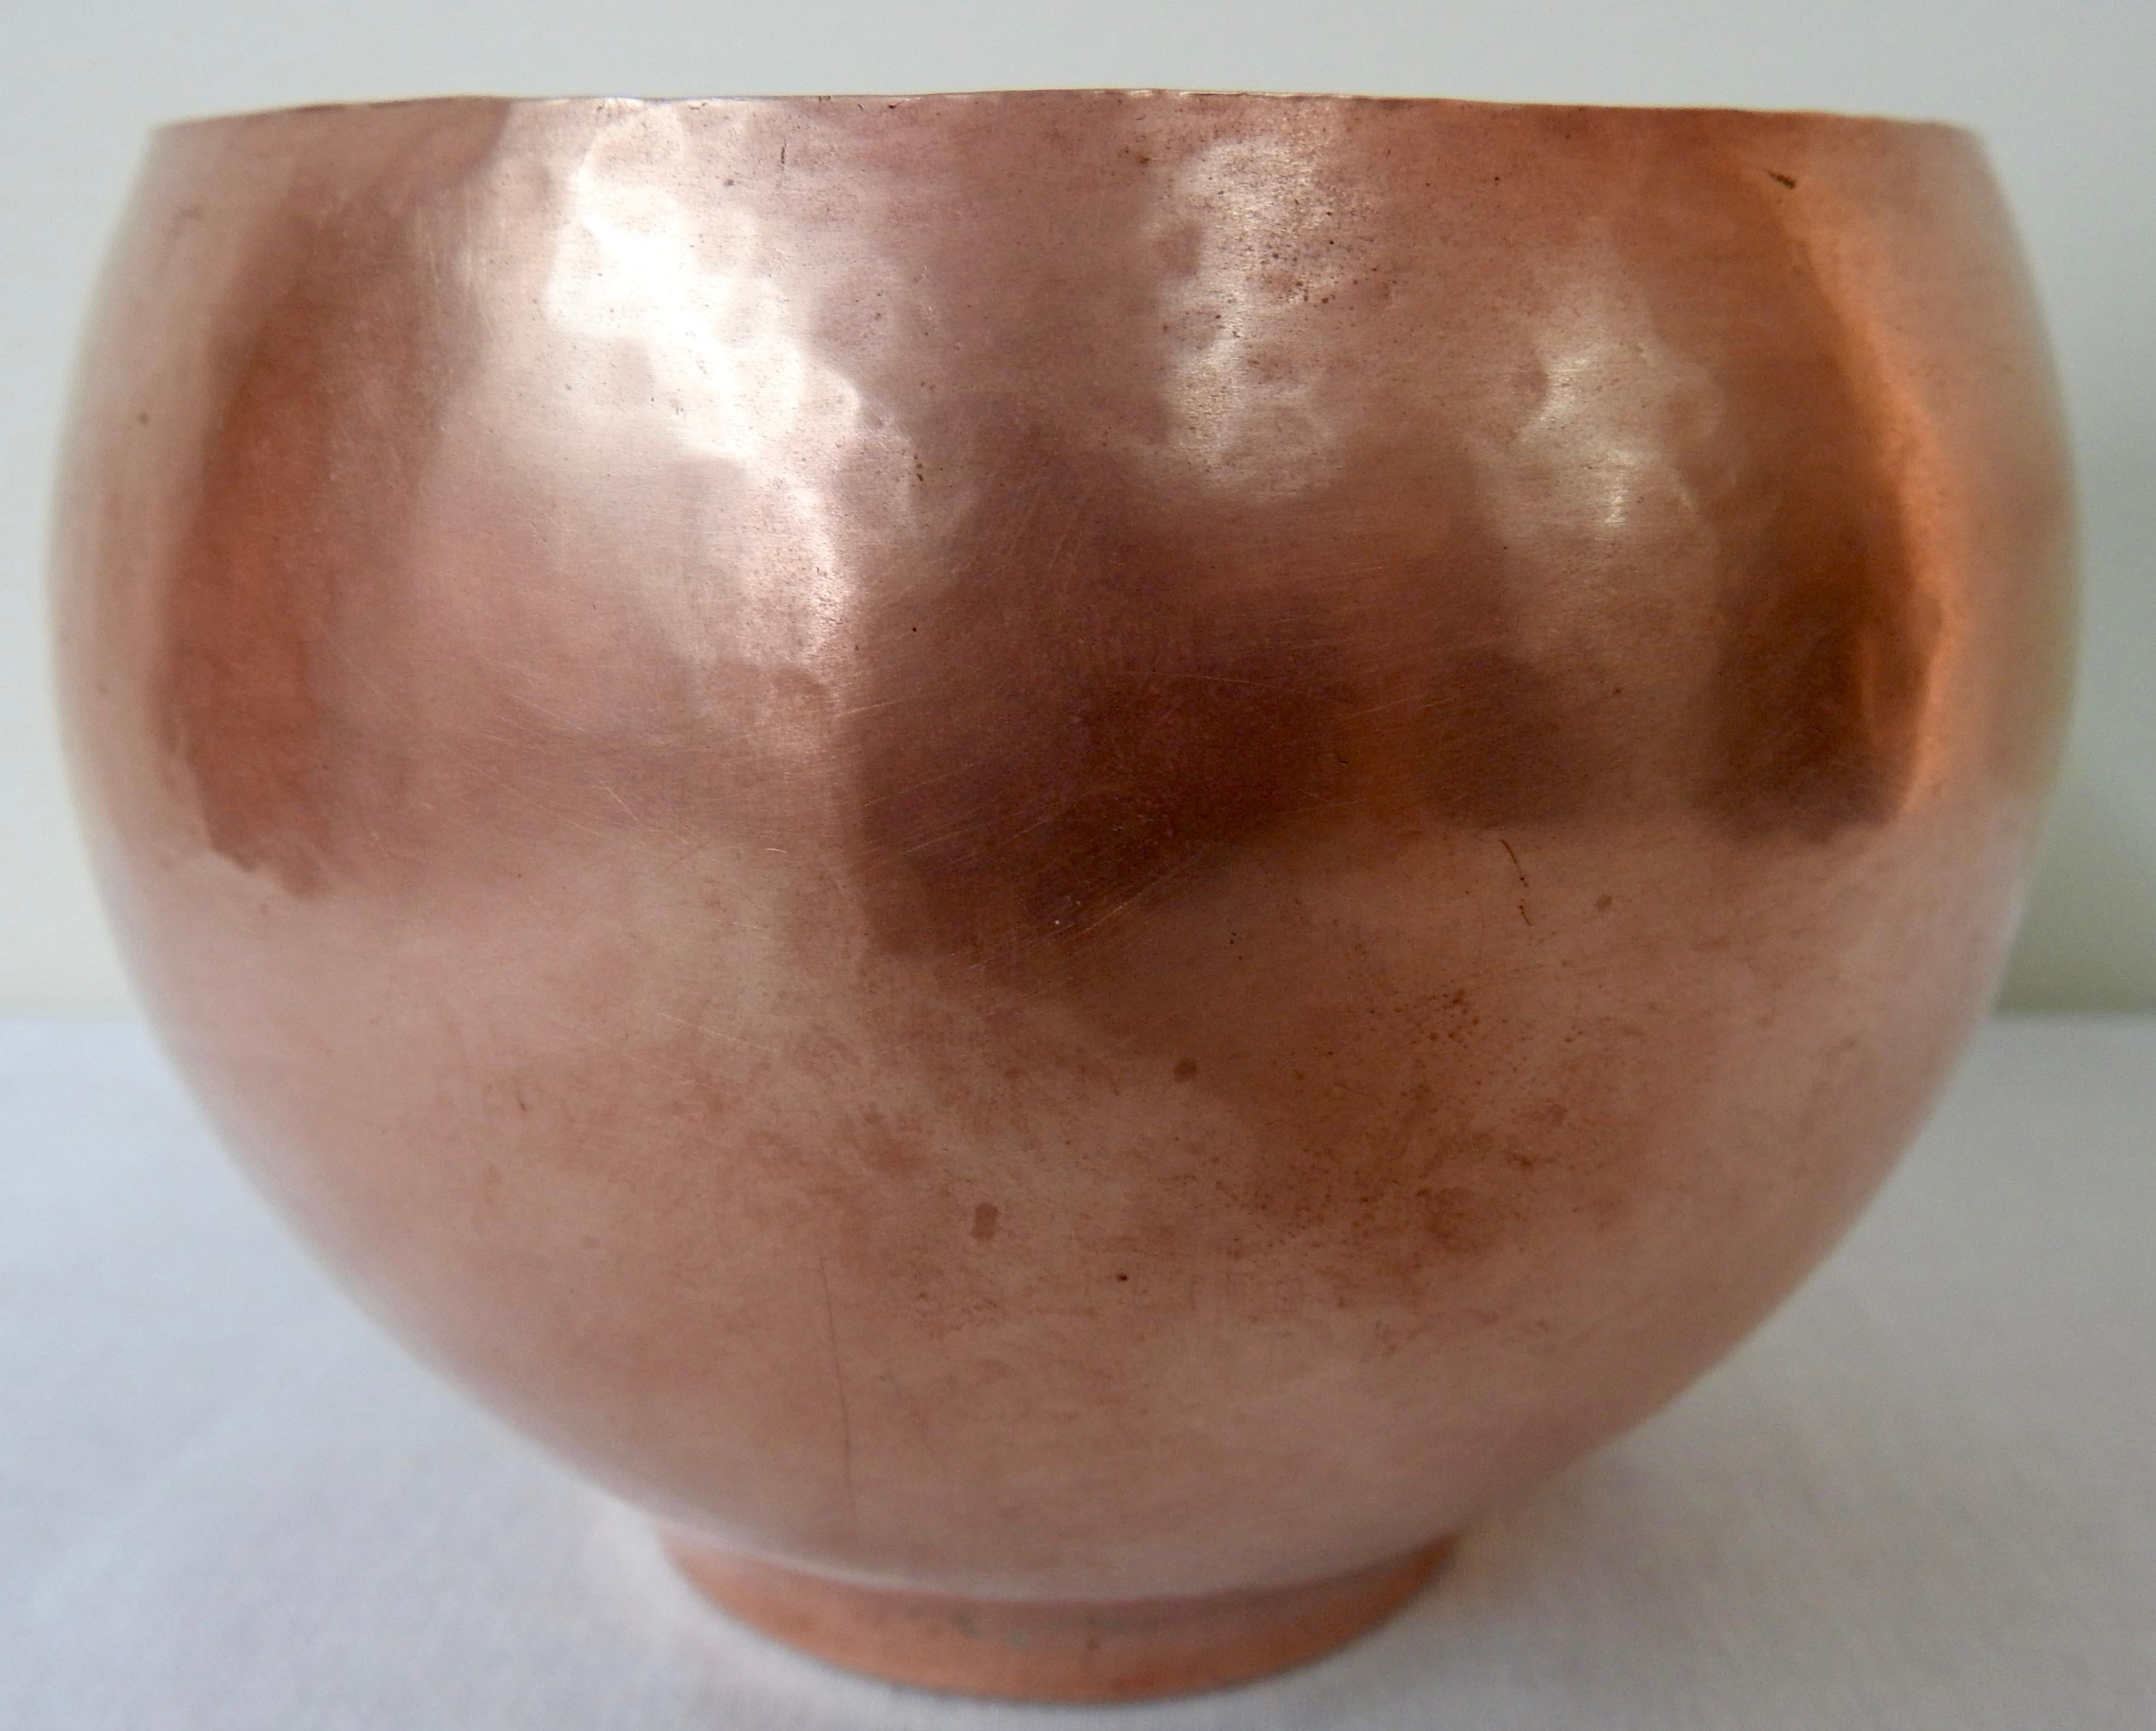 This is a Classic piece of vintage artisan decor with a copper finish. This is a 1940s handwrought copper tone metal vessel marked with incised signature appearing to read “Harrison ’48, handwrought” to the underside. It is a nice piece of